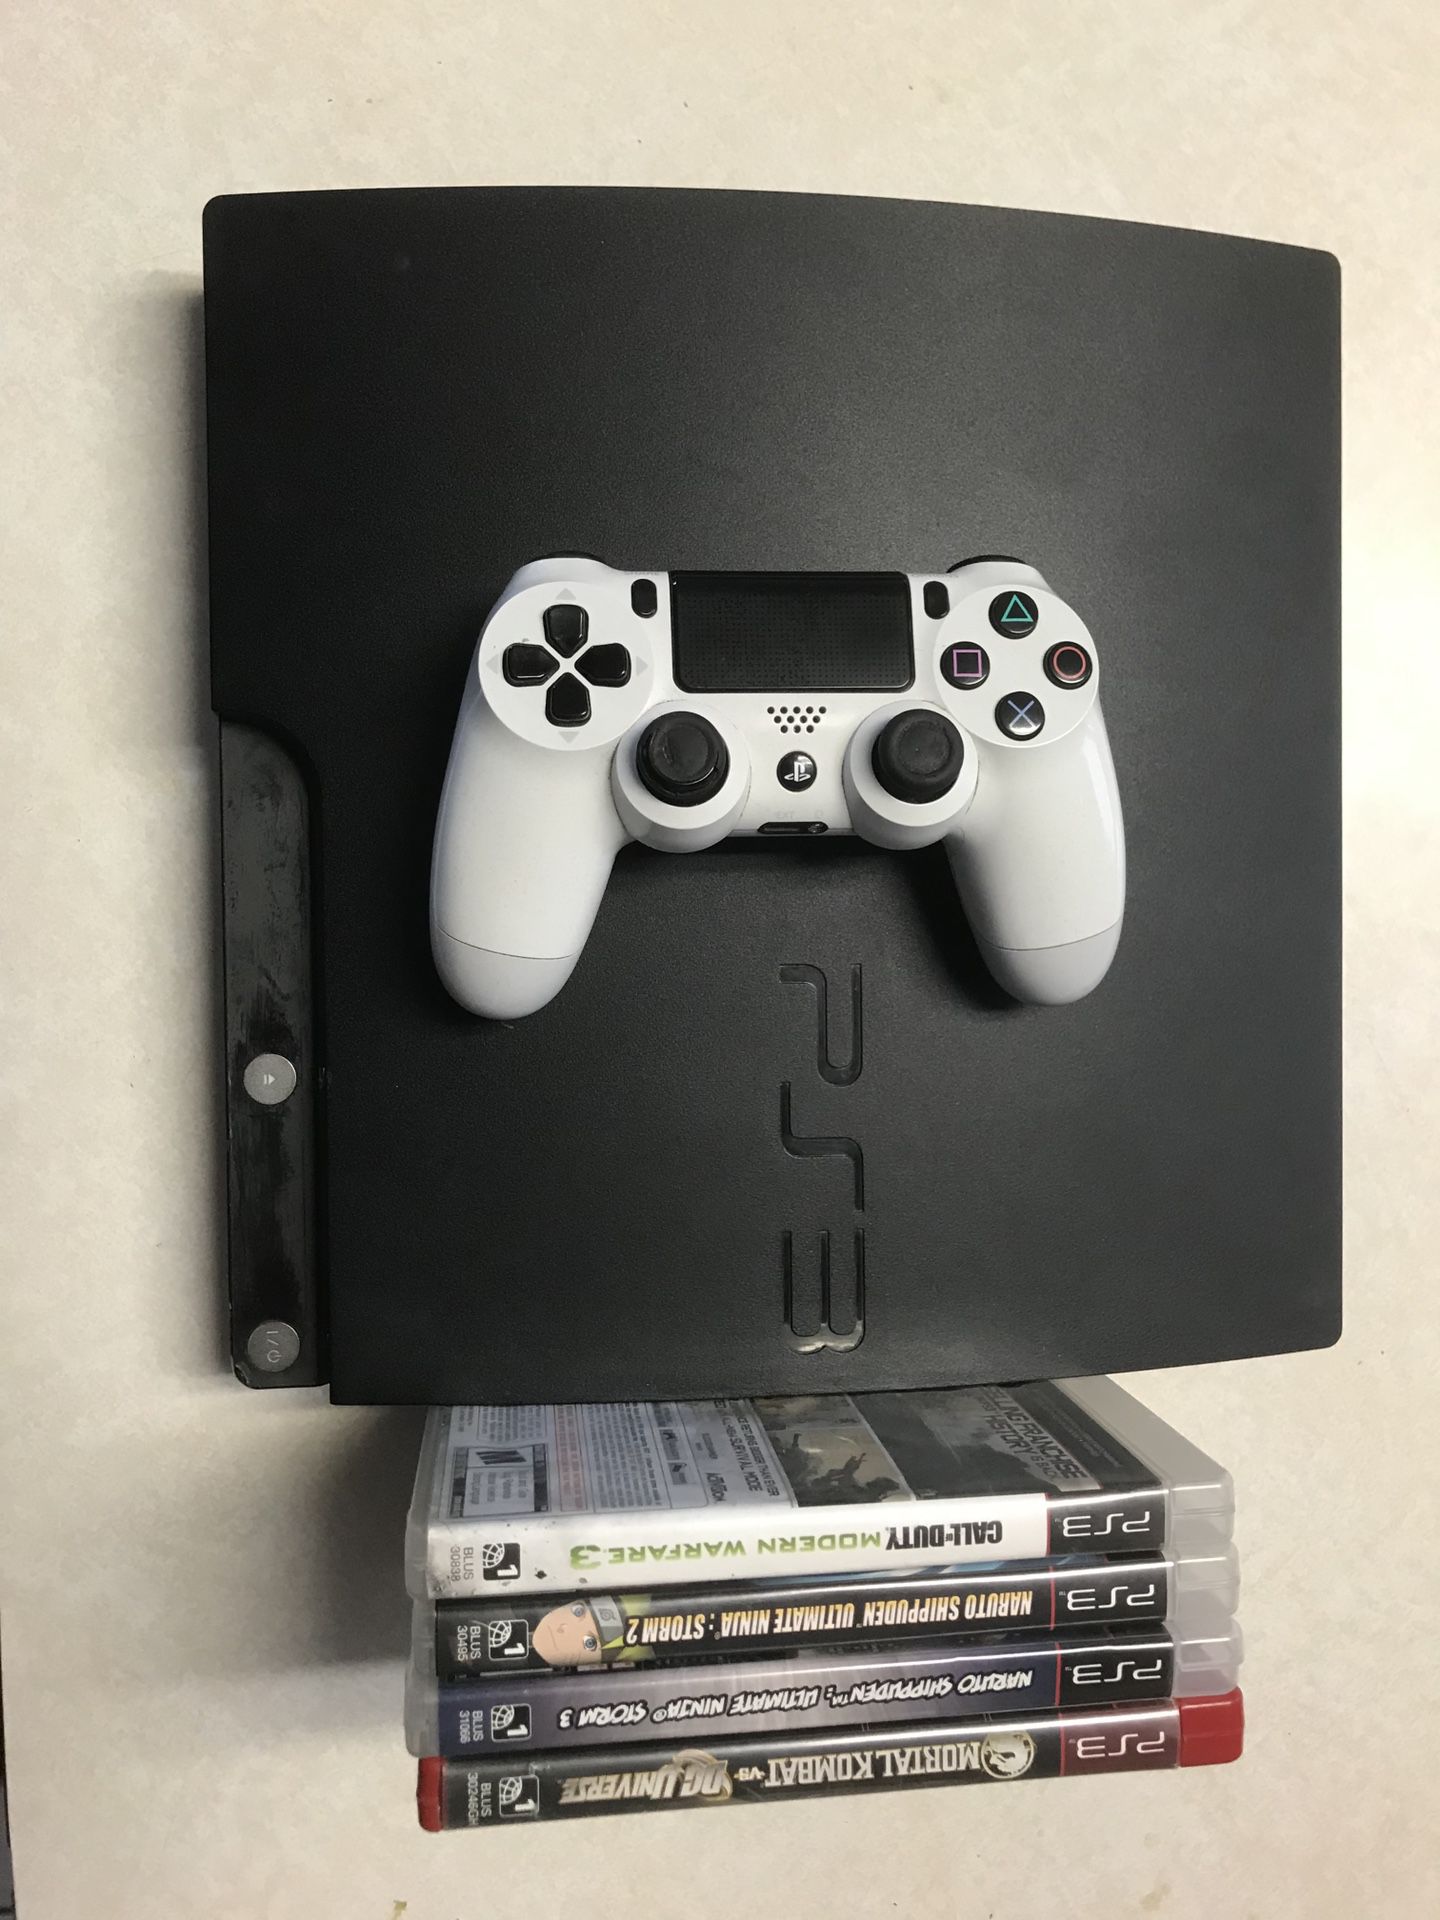 PS3 like new with new controller and games